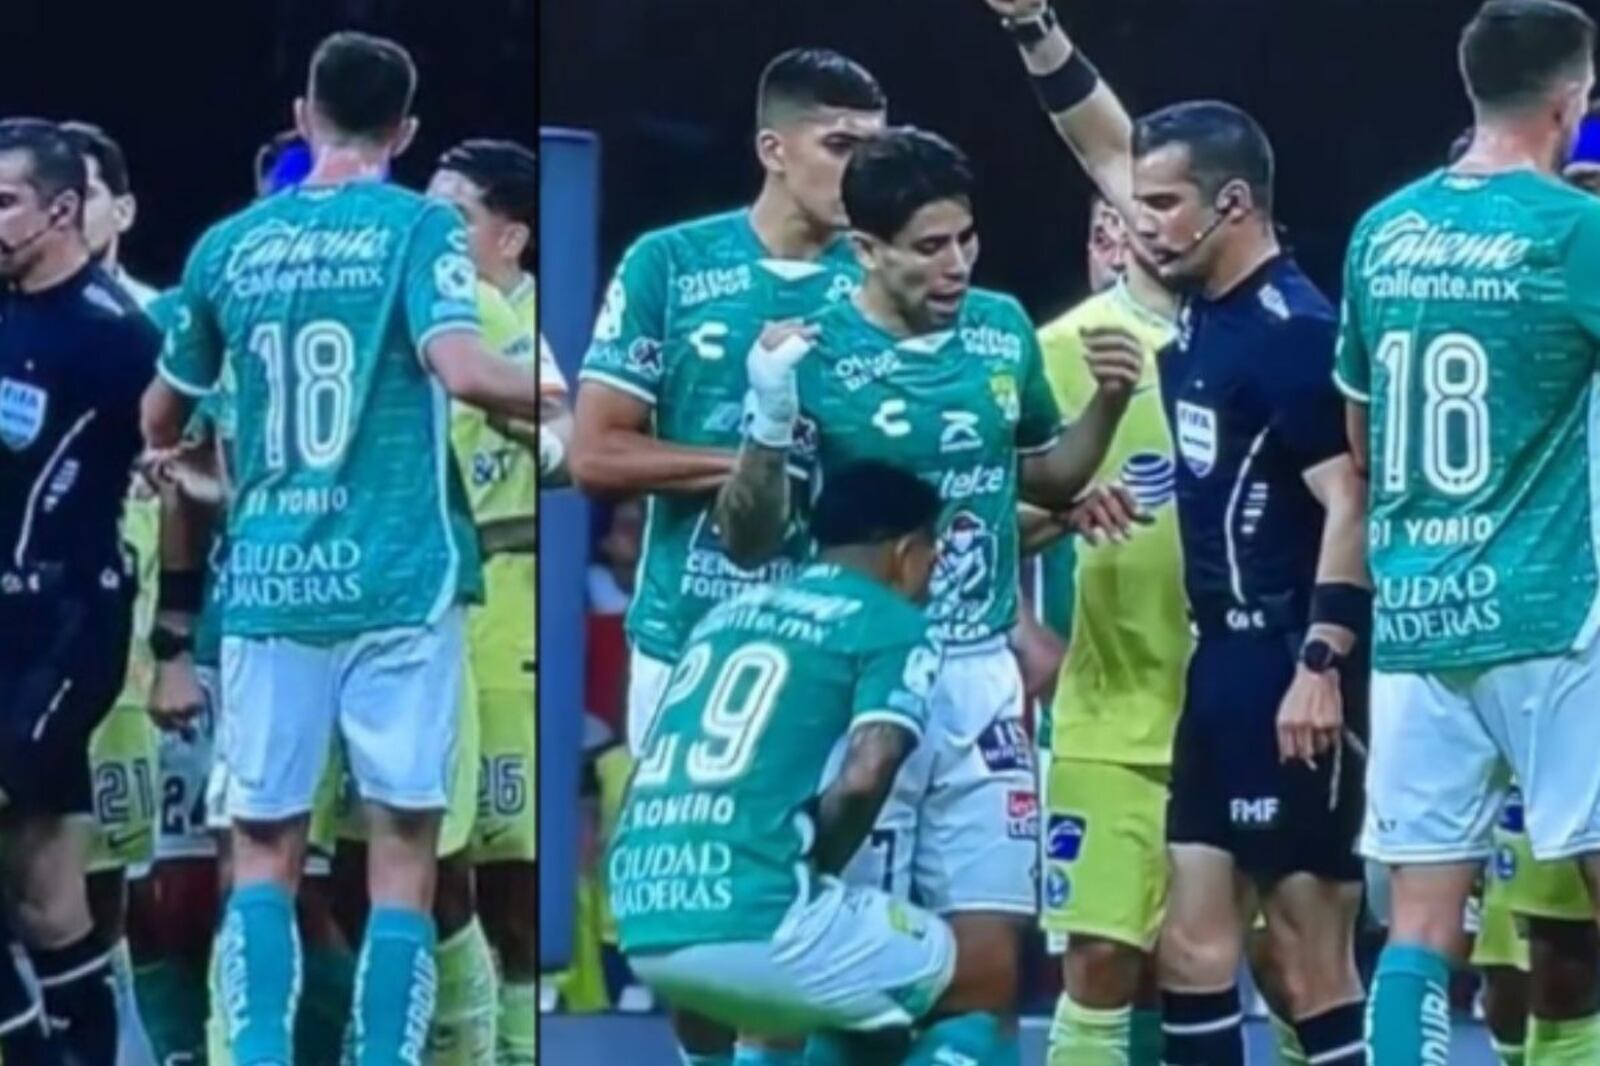 This is the punishment of Fernando Hernández after attacking a León player